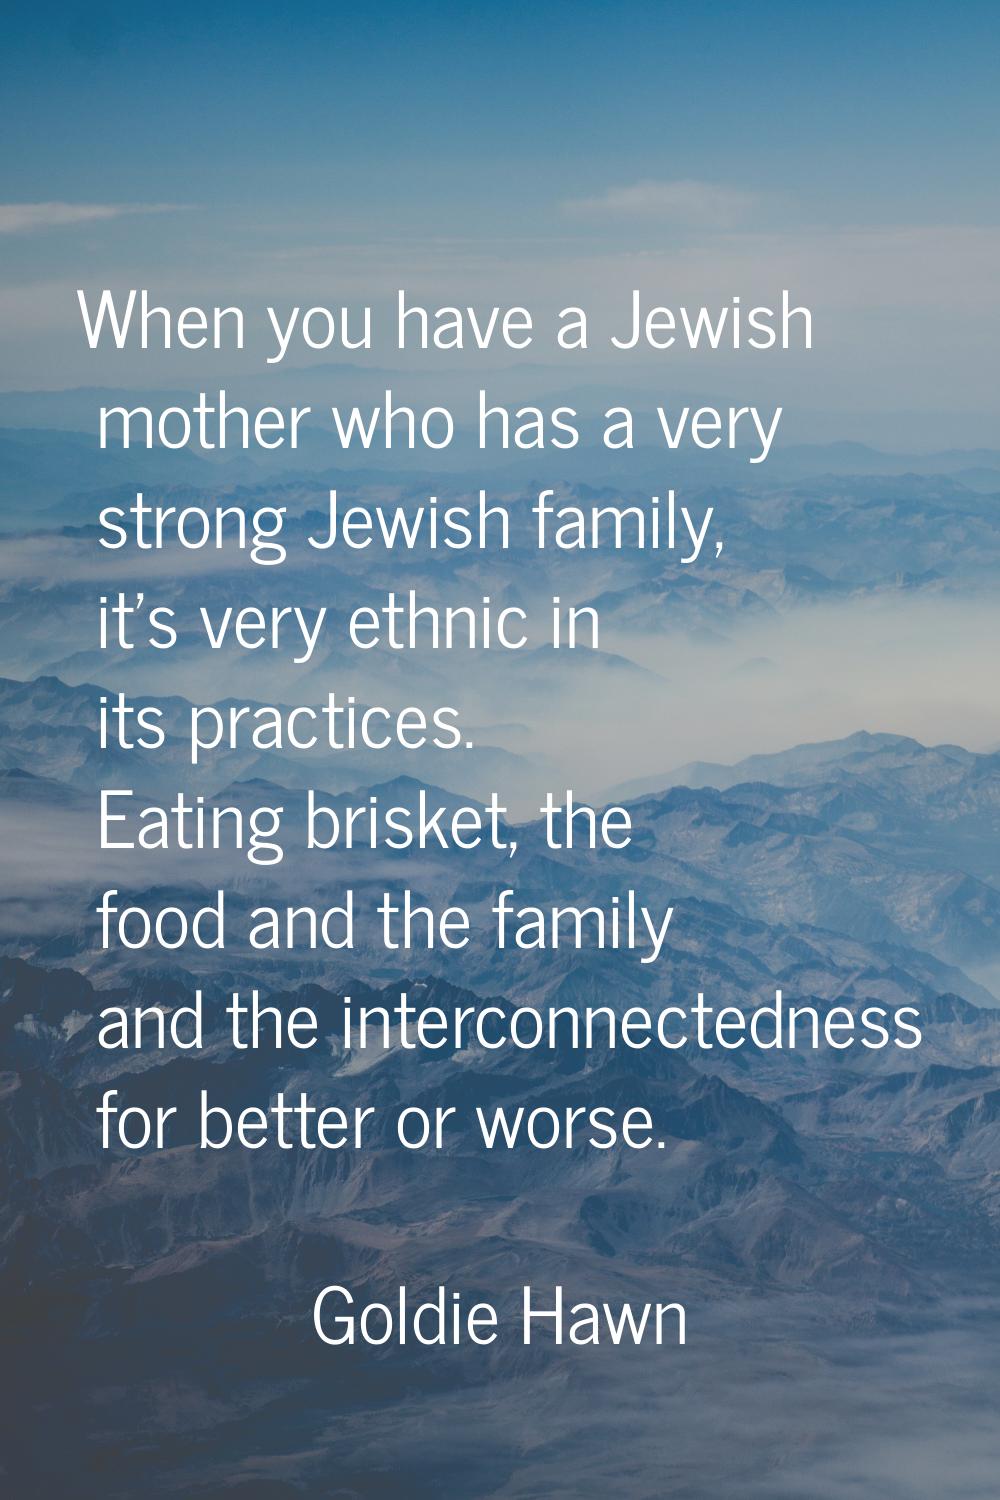 When you have a Jewish mother who has a very strong Jewish family, it's very ethnic in its practice